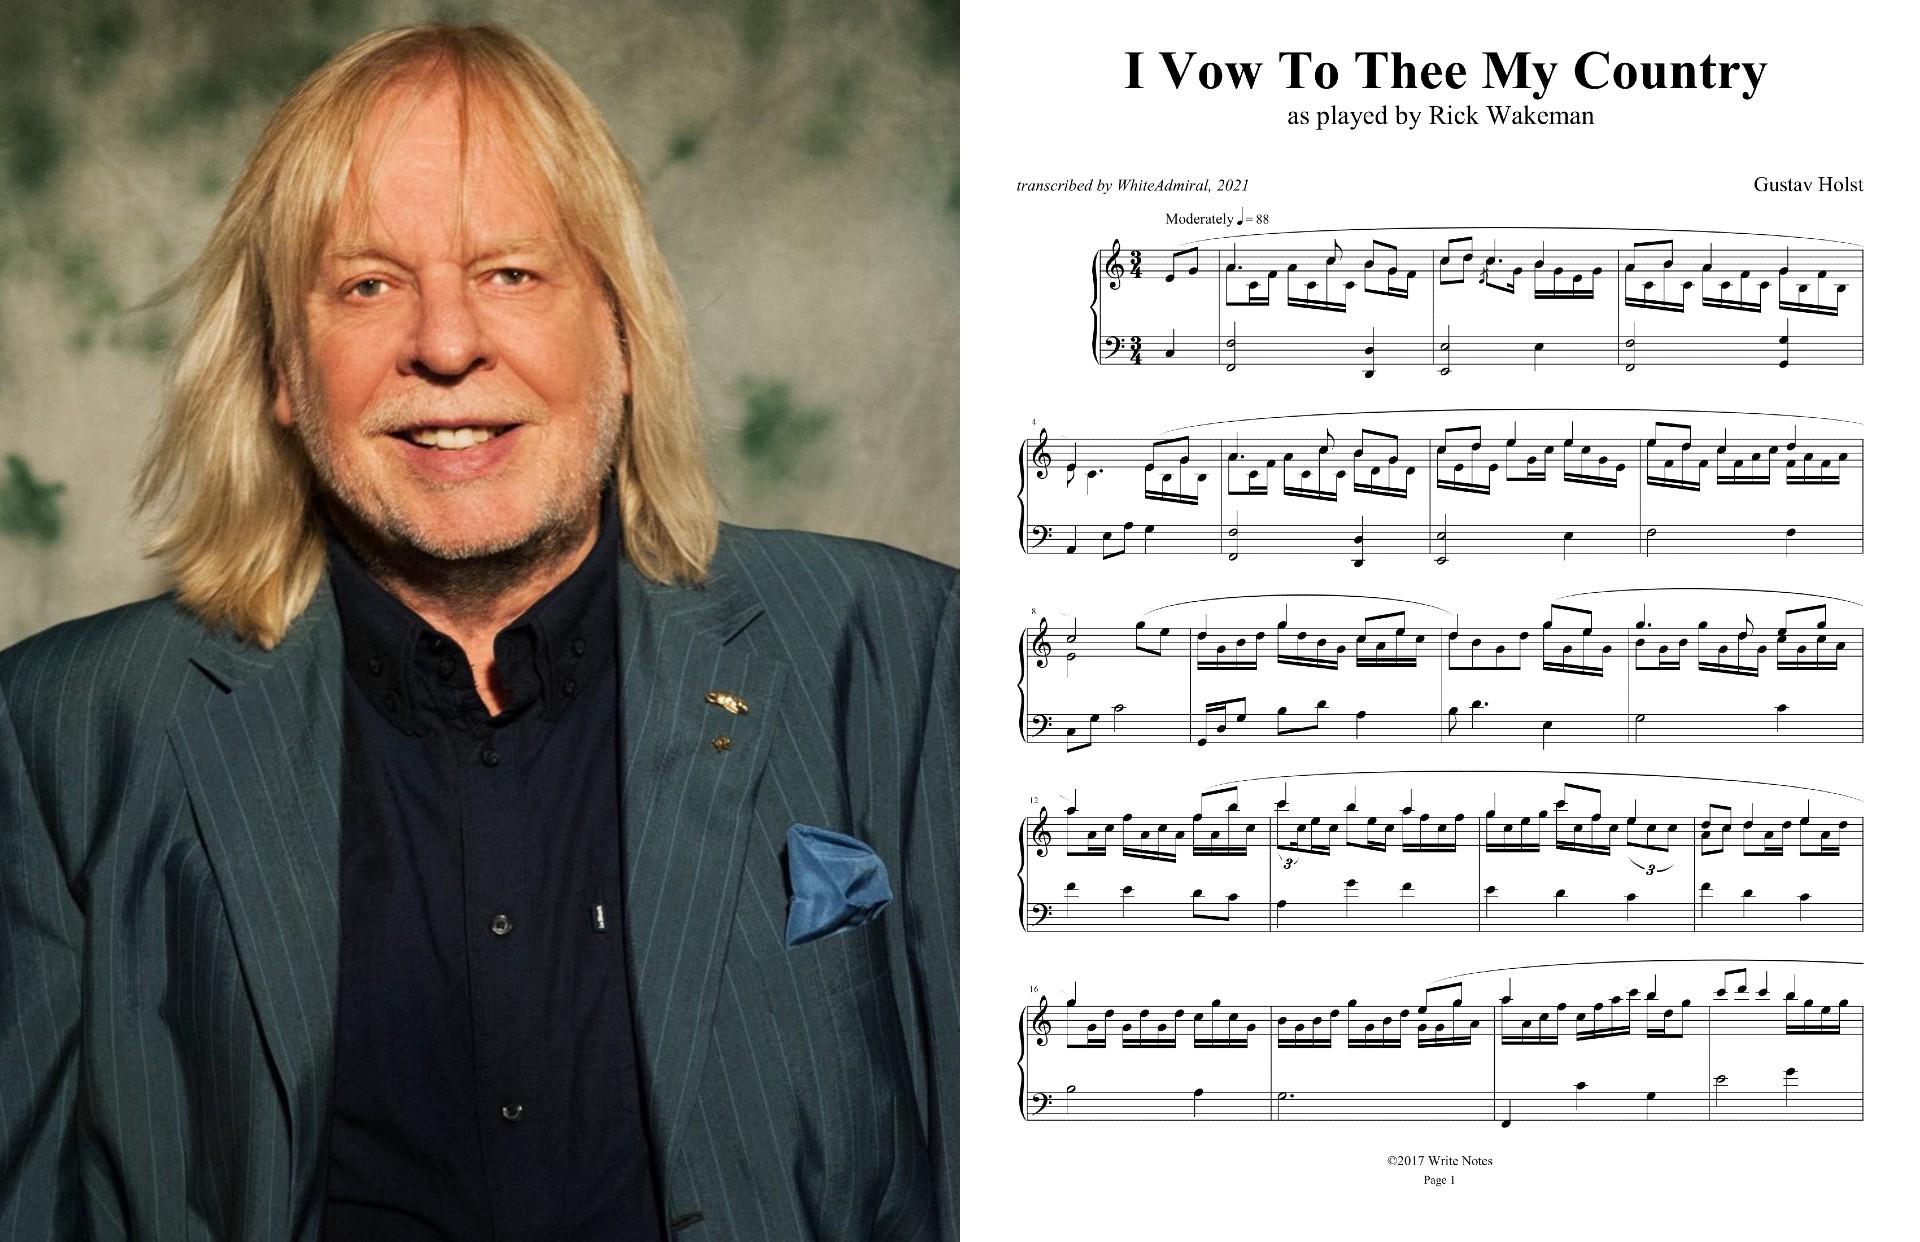 I Vow To Thee My Country - Rick Wakeman.jpg